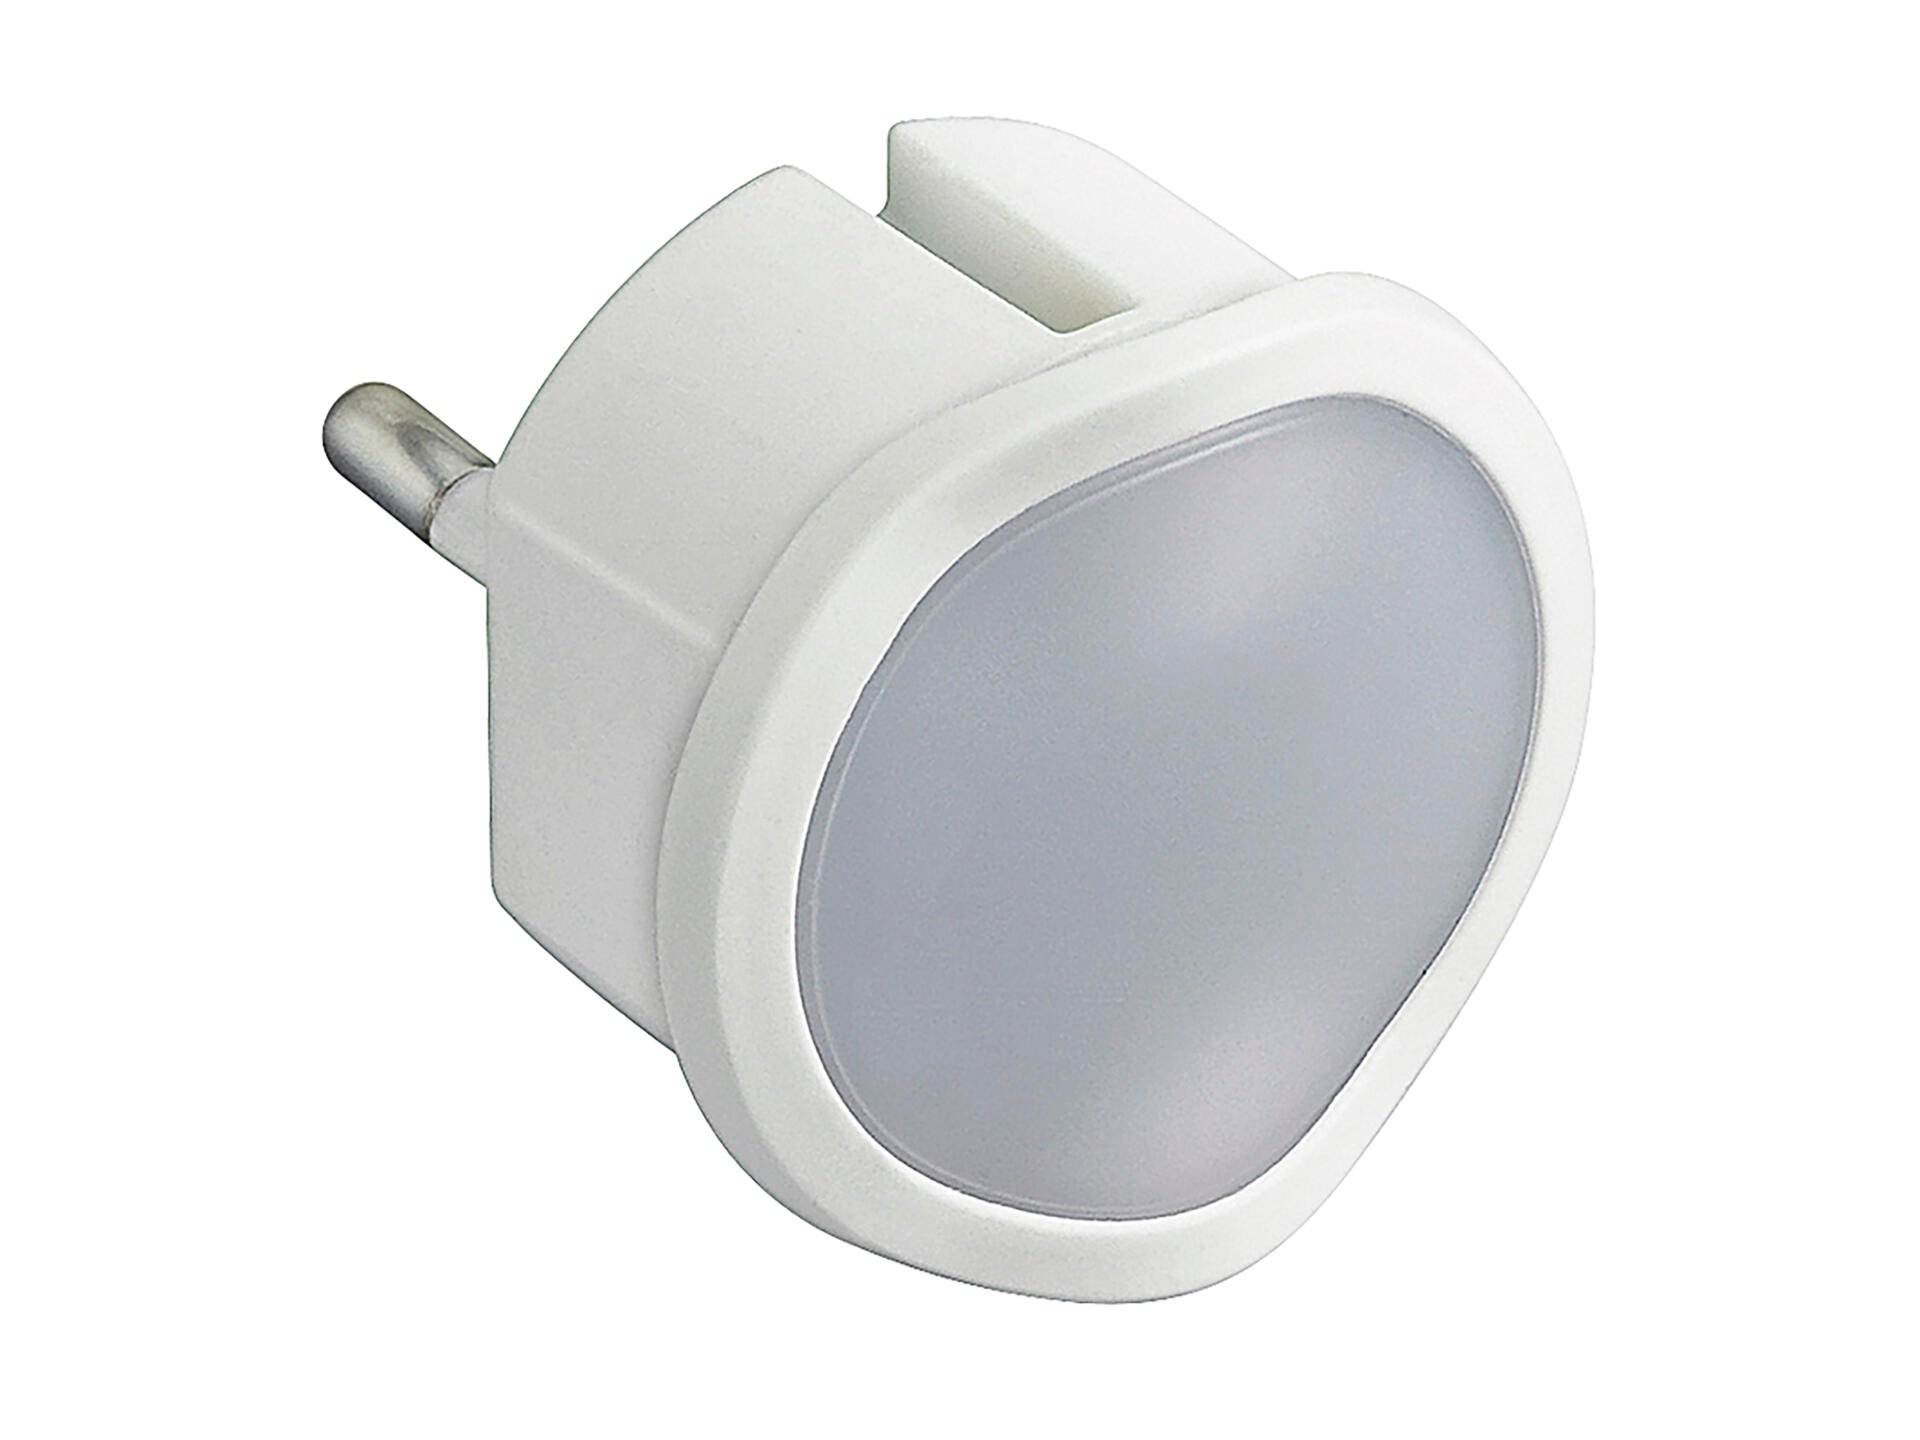 Legrand veilleuse LED dimmable blanc